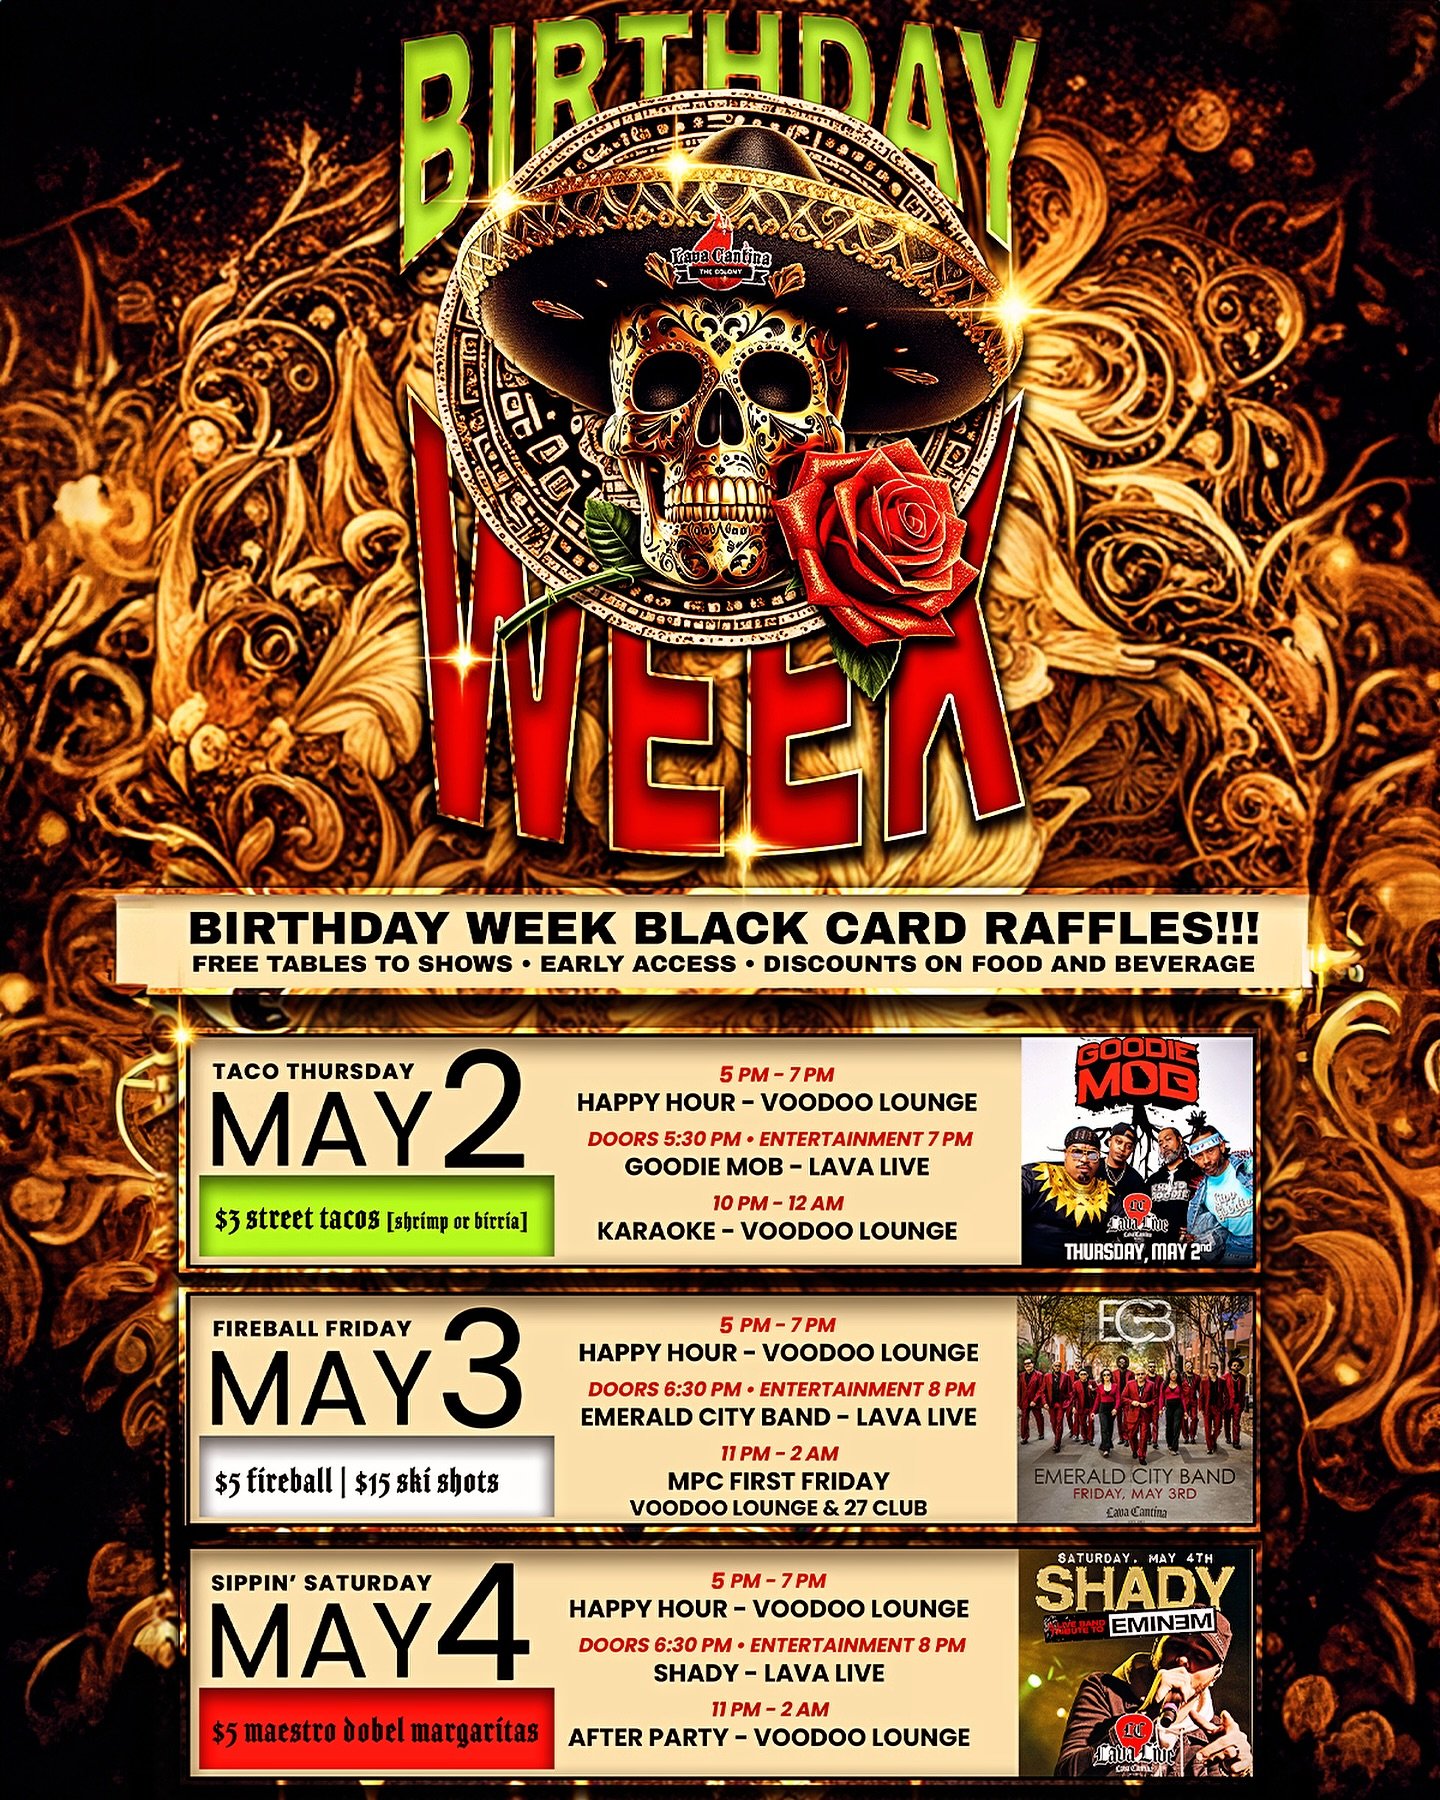 🚨 BIRTHDAY WEEK @lavacantinac 🚨

🎉🥳🔥🎉🥳🔥 - GET YOUR TIX NOW!
🎟️🎟️➡️ LavaCantina.com

TACO THURSDAY - May 2nd
🪇$3 Street Tacos🪇
Happy Hour 5 PM - 7 PM
GOODIE MOBB 
🔥Lava Live at Lava Cantina
Doors  5:30 PM | Entertainment 7 PM
AGES: All Ag